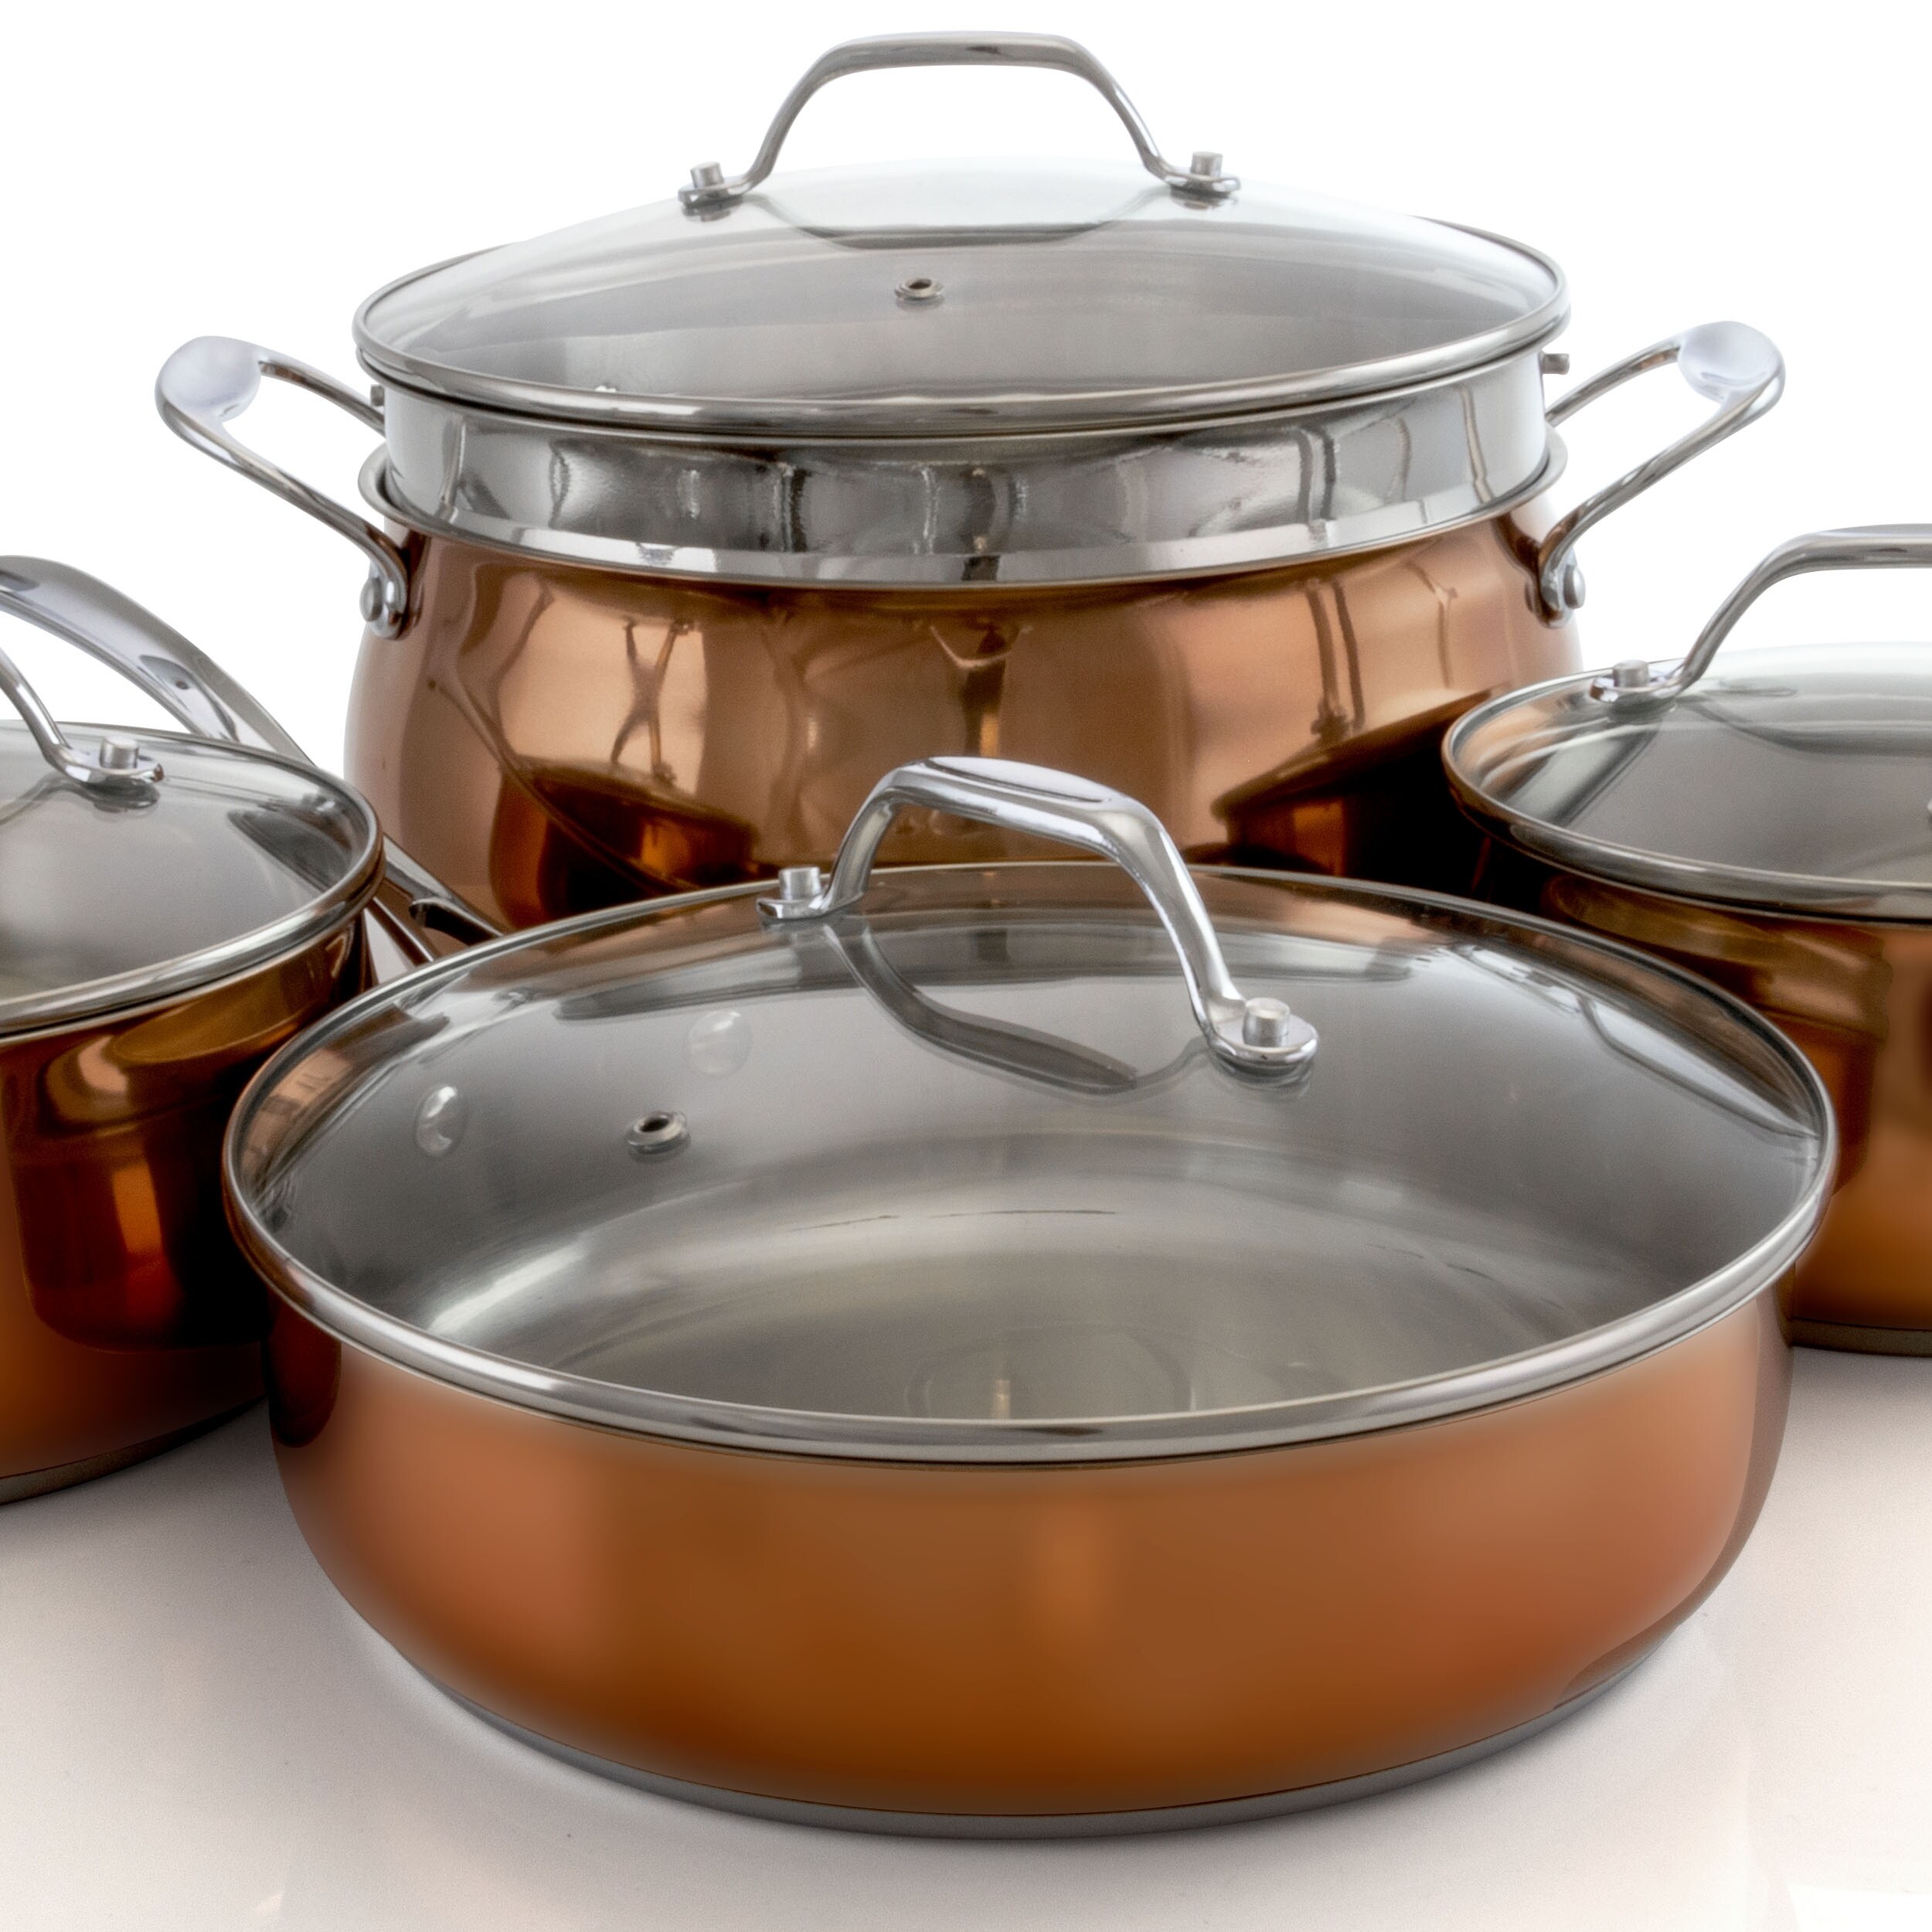 Stainless Steel Cookware 9 Piece Set in Silver and Bronze - On